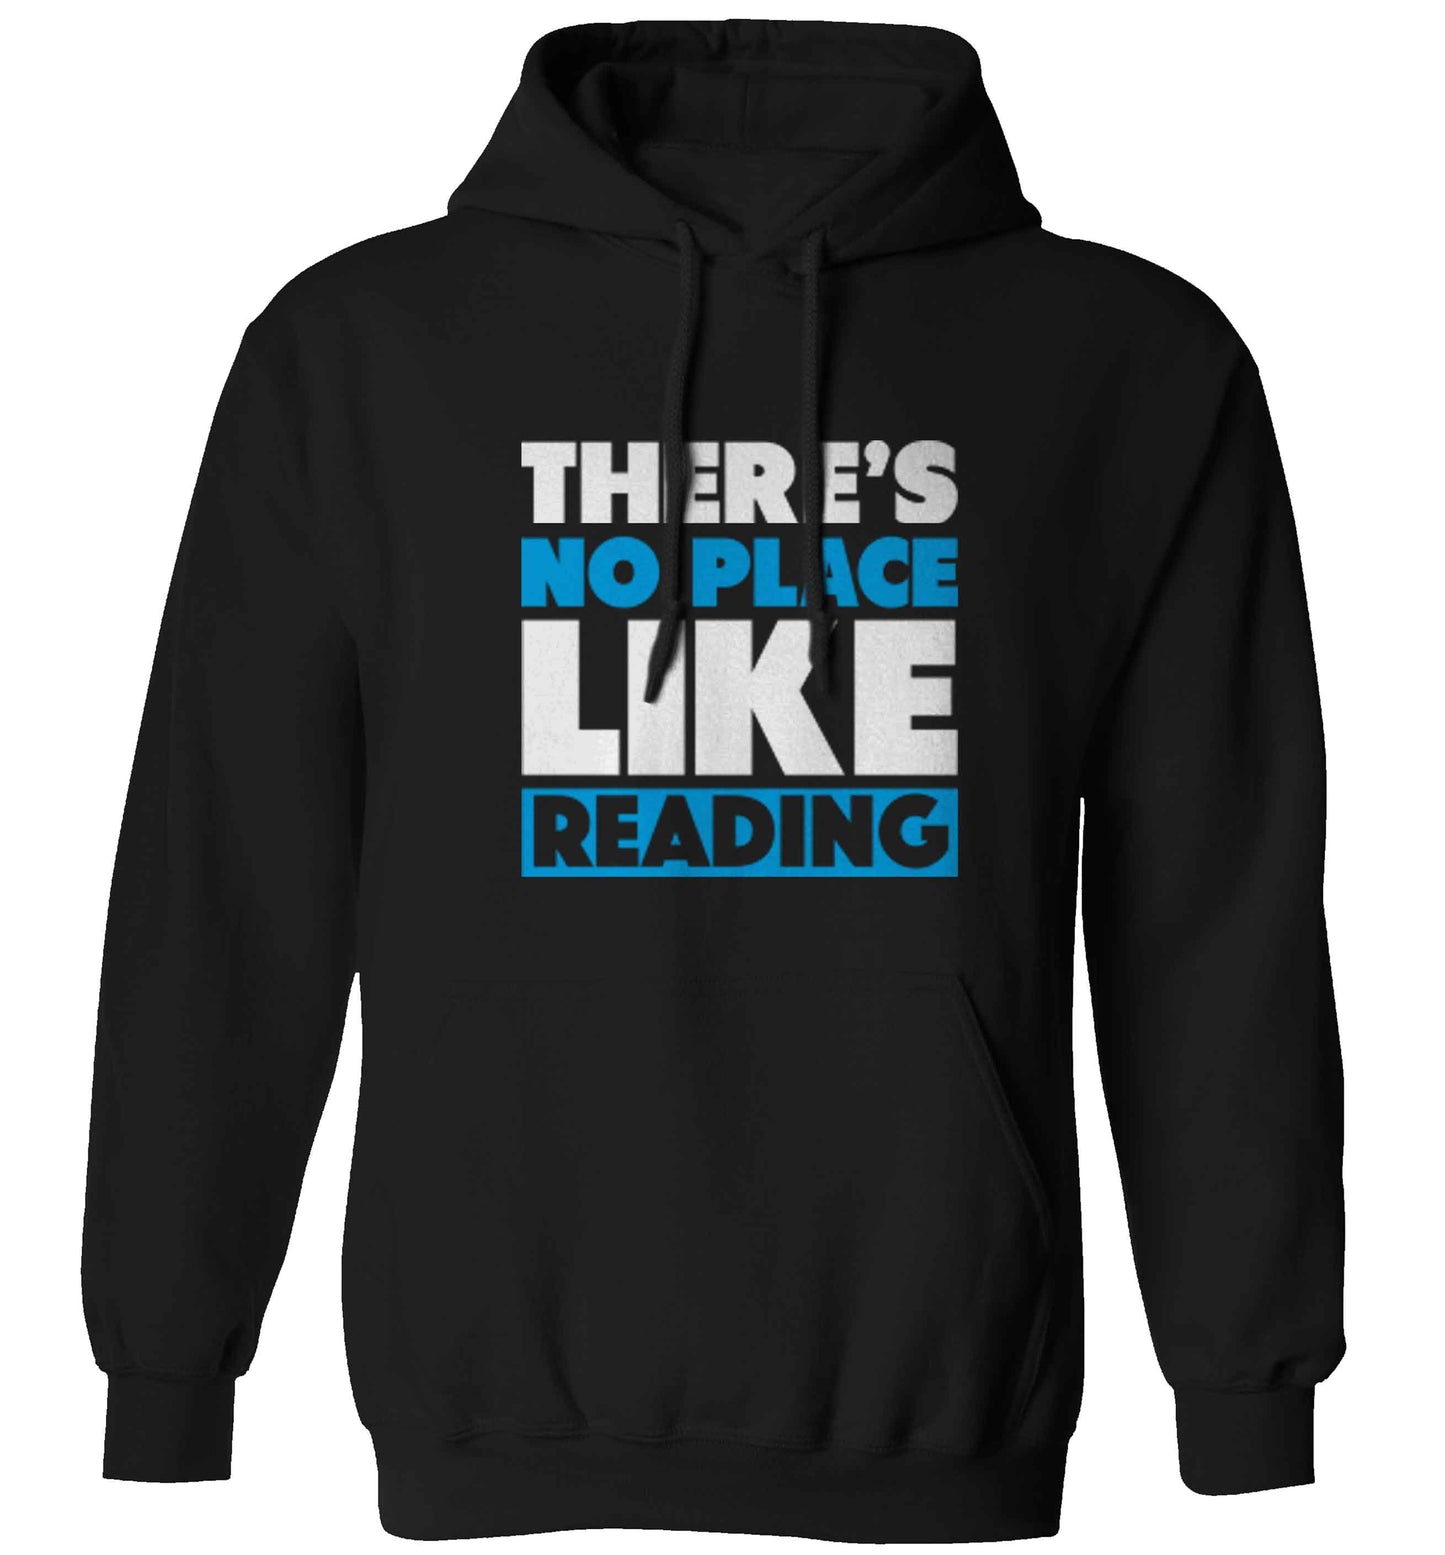 There's no place like Readingadults unisex black hoodie 2XL